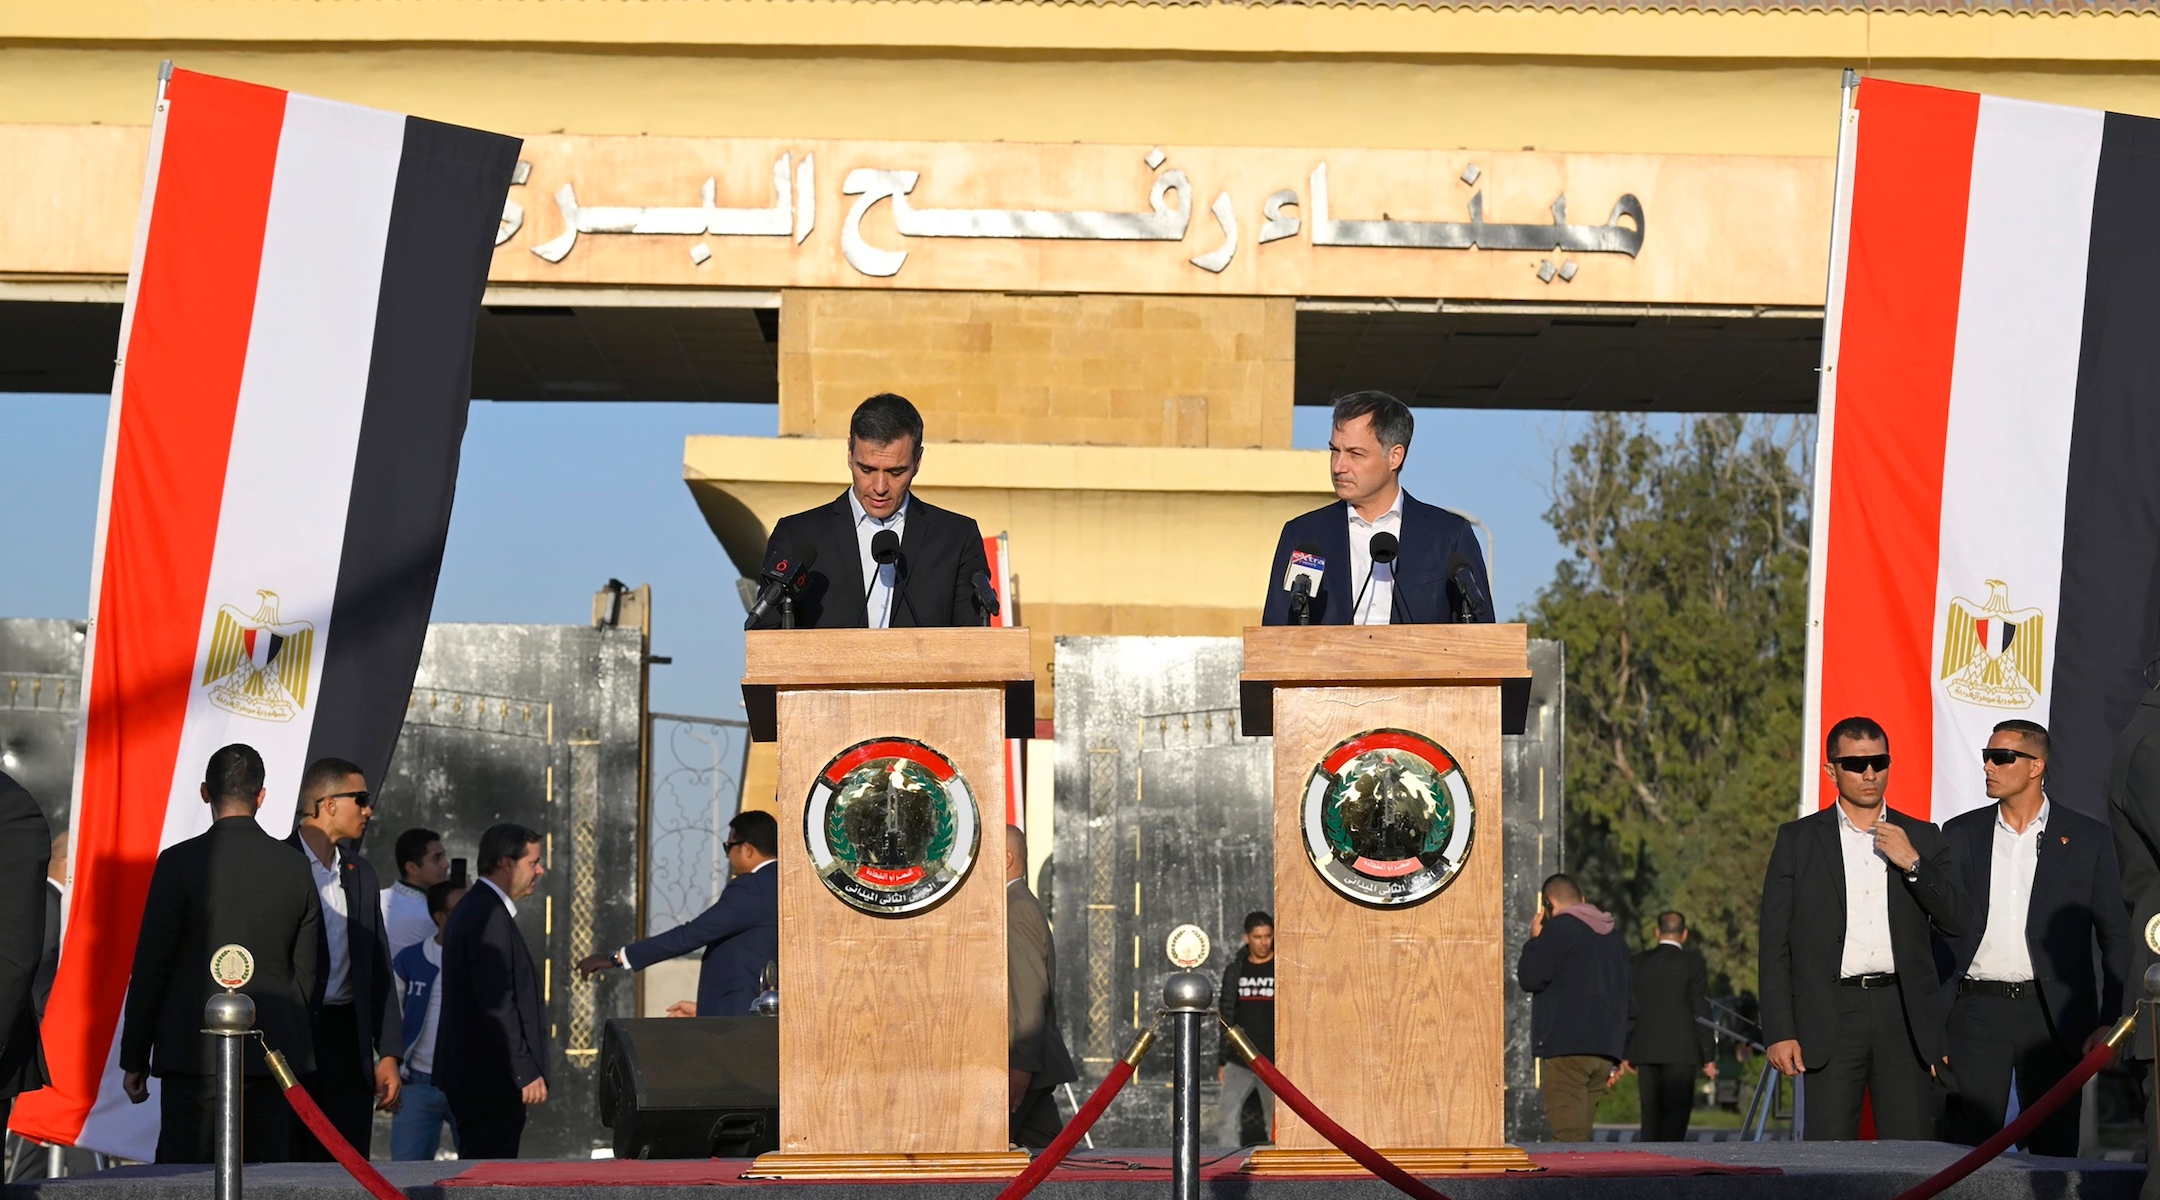 Spain’s Prime Minister Pedro Sanchez, left, and Belgium’s Prime Minister Alexander De Croo hold a press conference at the Rafah border crossing in Egypt, Nov. 24, 2023. (Philip Reynaers/Photo News via Getty Images)